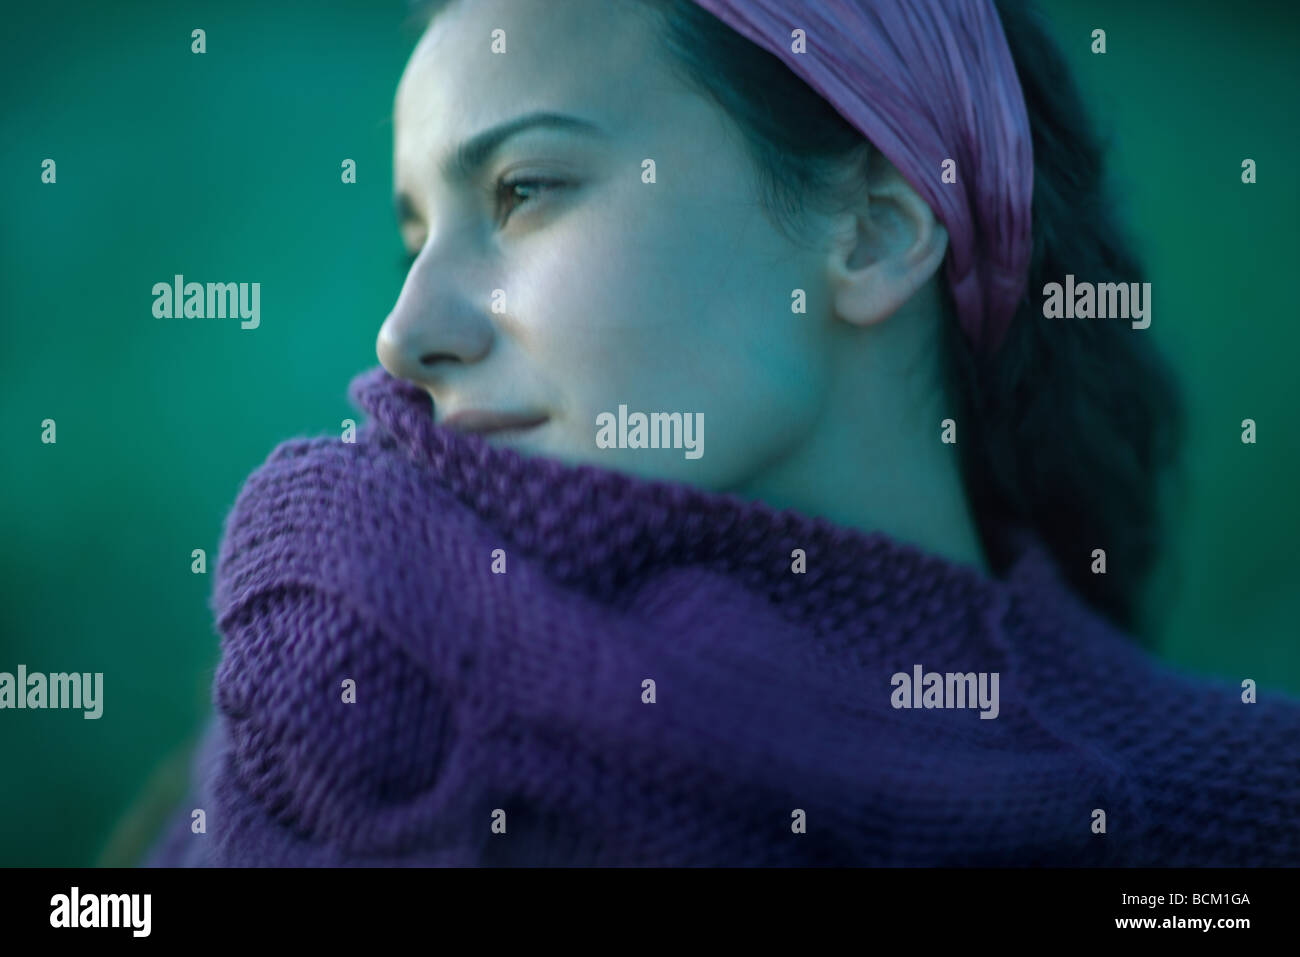 Woman pulling sweater up to face, looking away, close-up Stock Photo